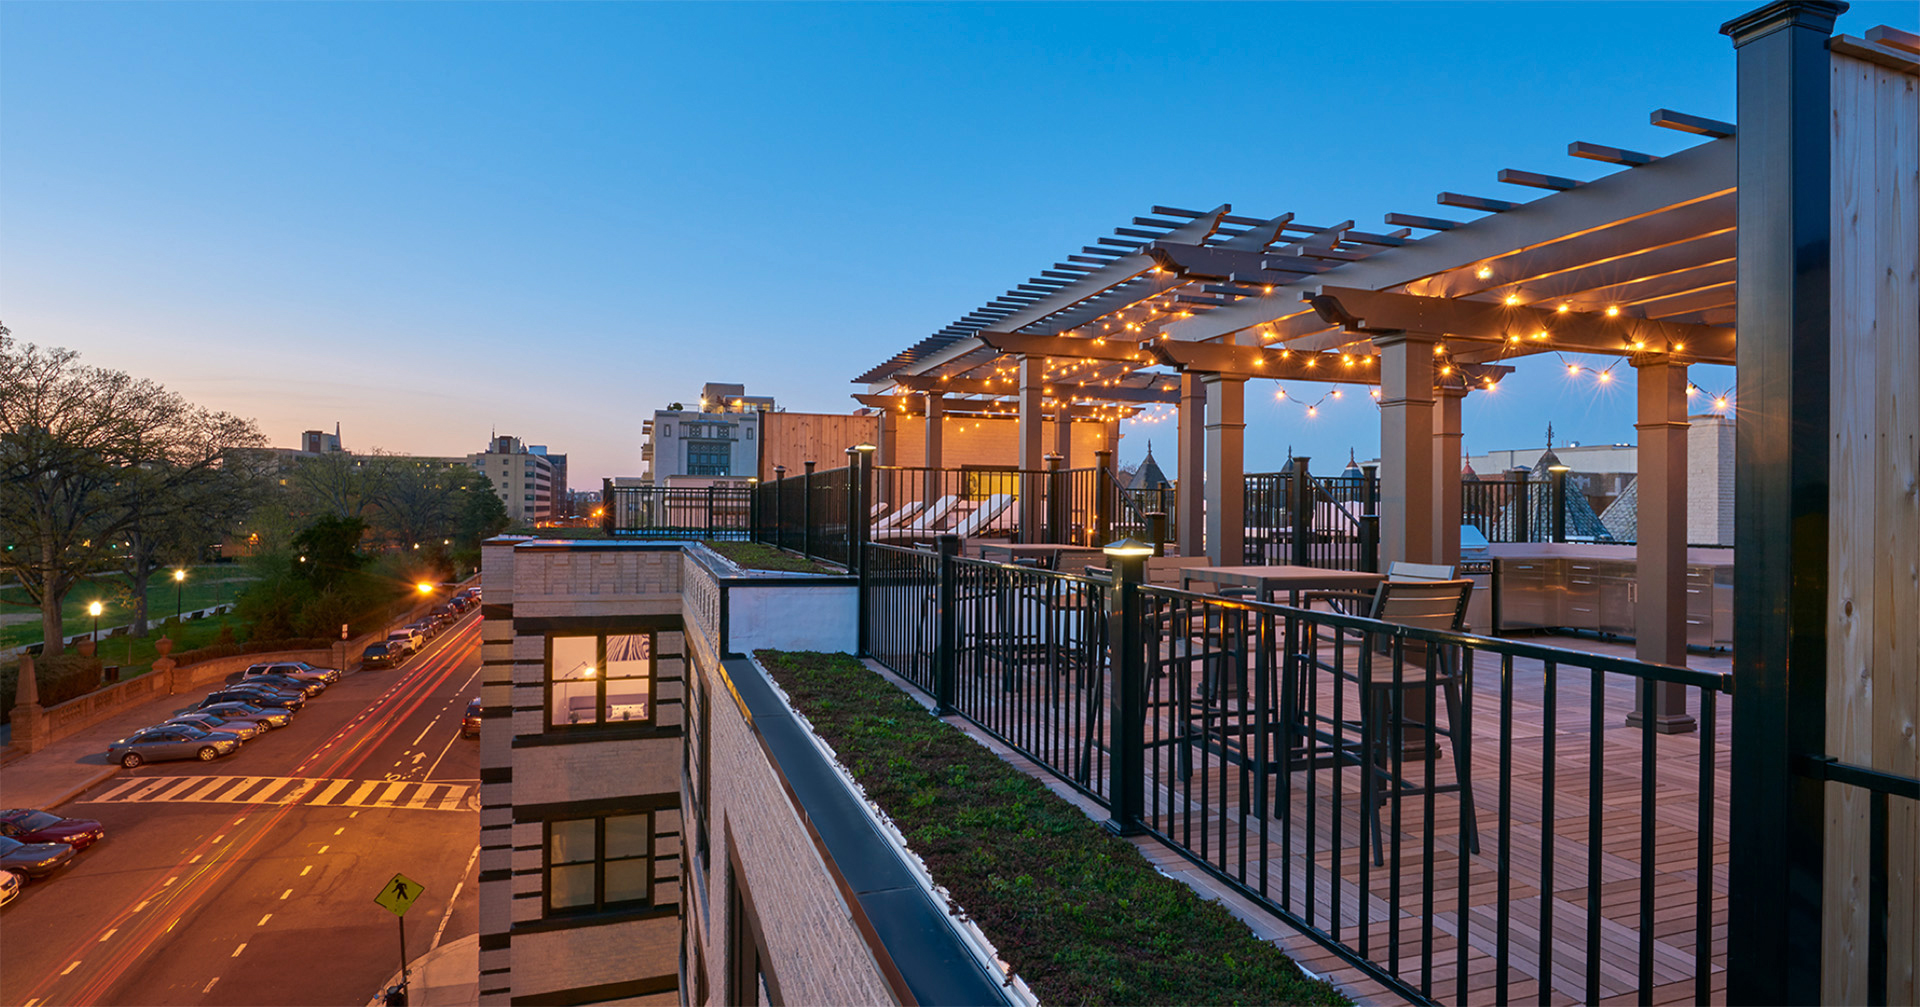 Modern roof deck at sunset with steel railing and pergolas with hanging lights creating an outdoor living space.